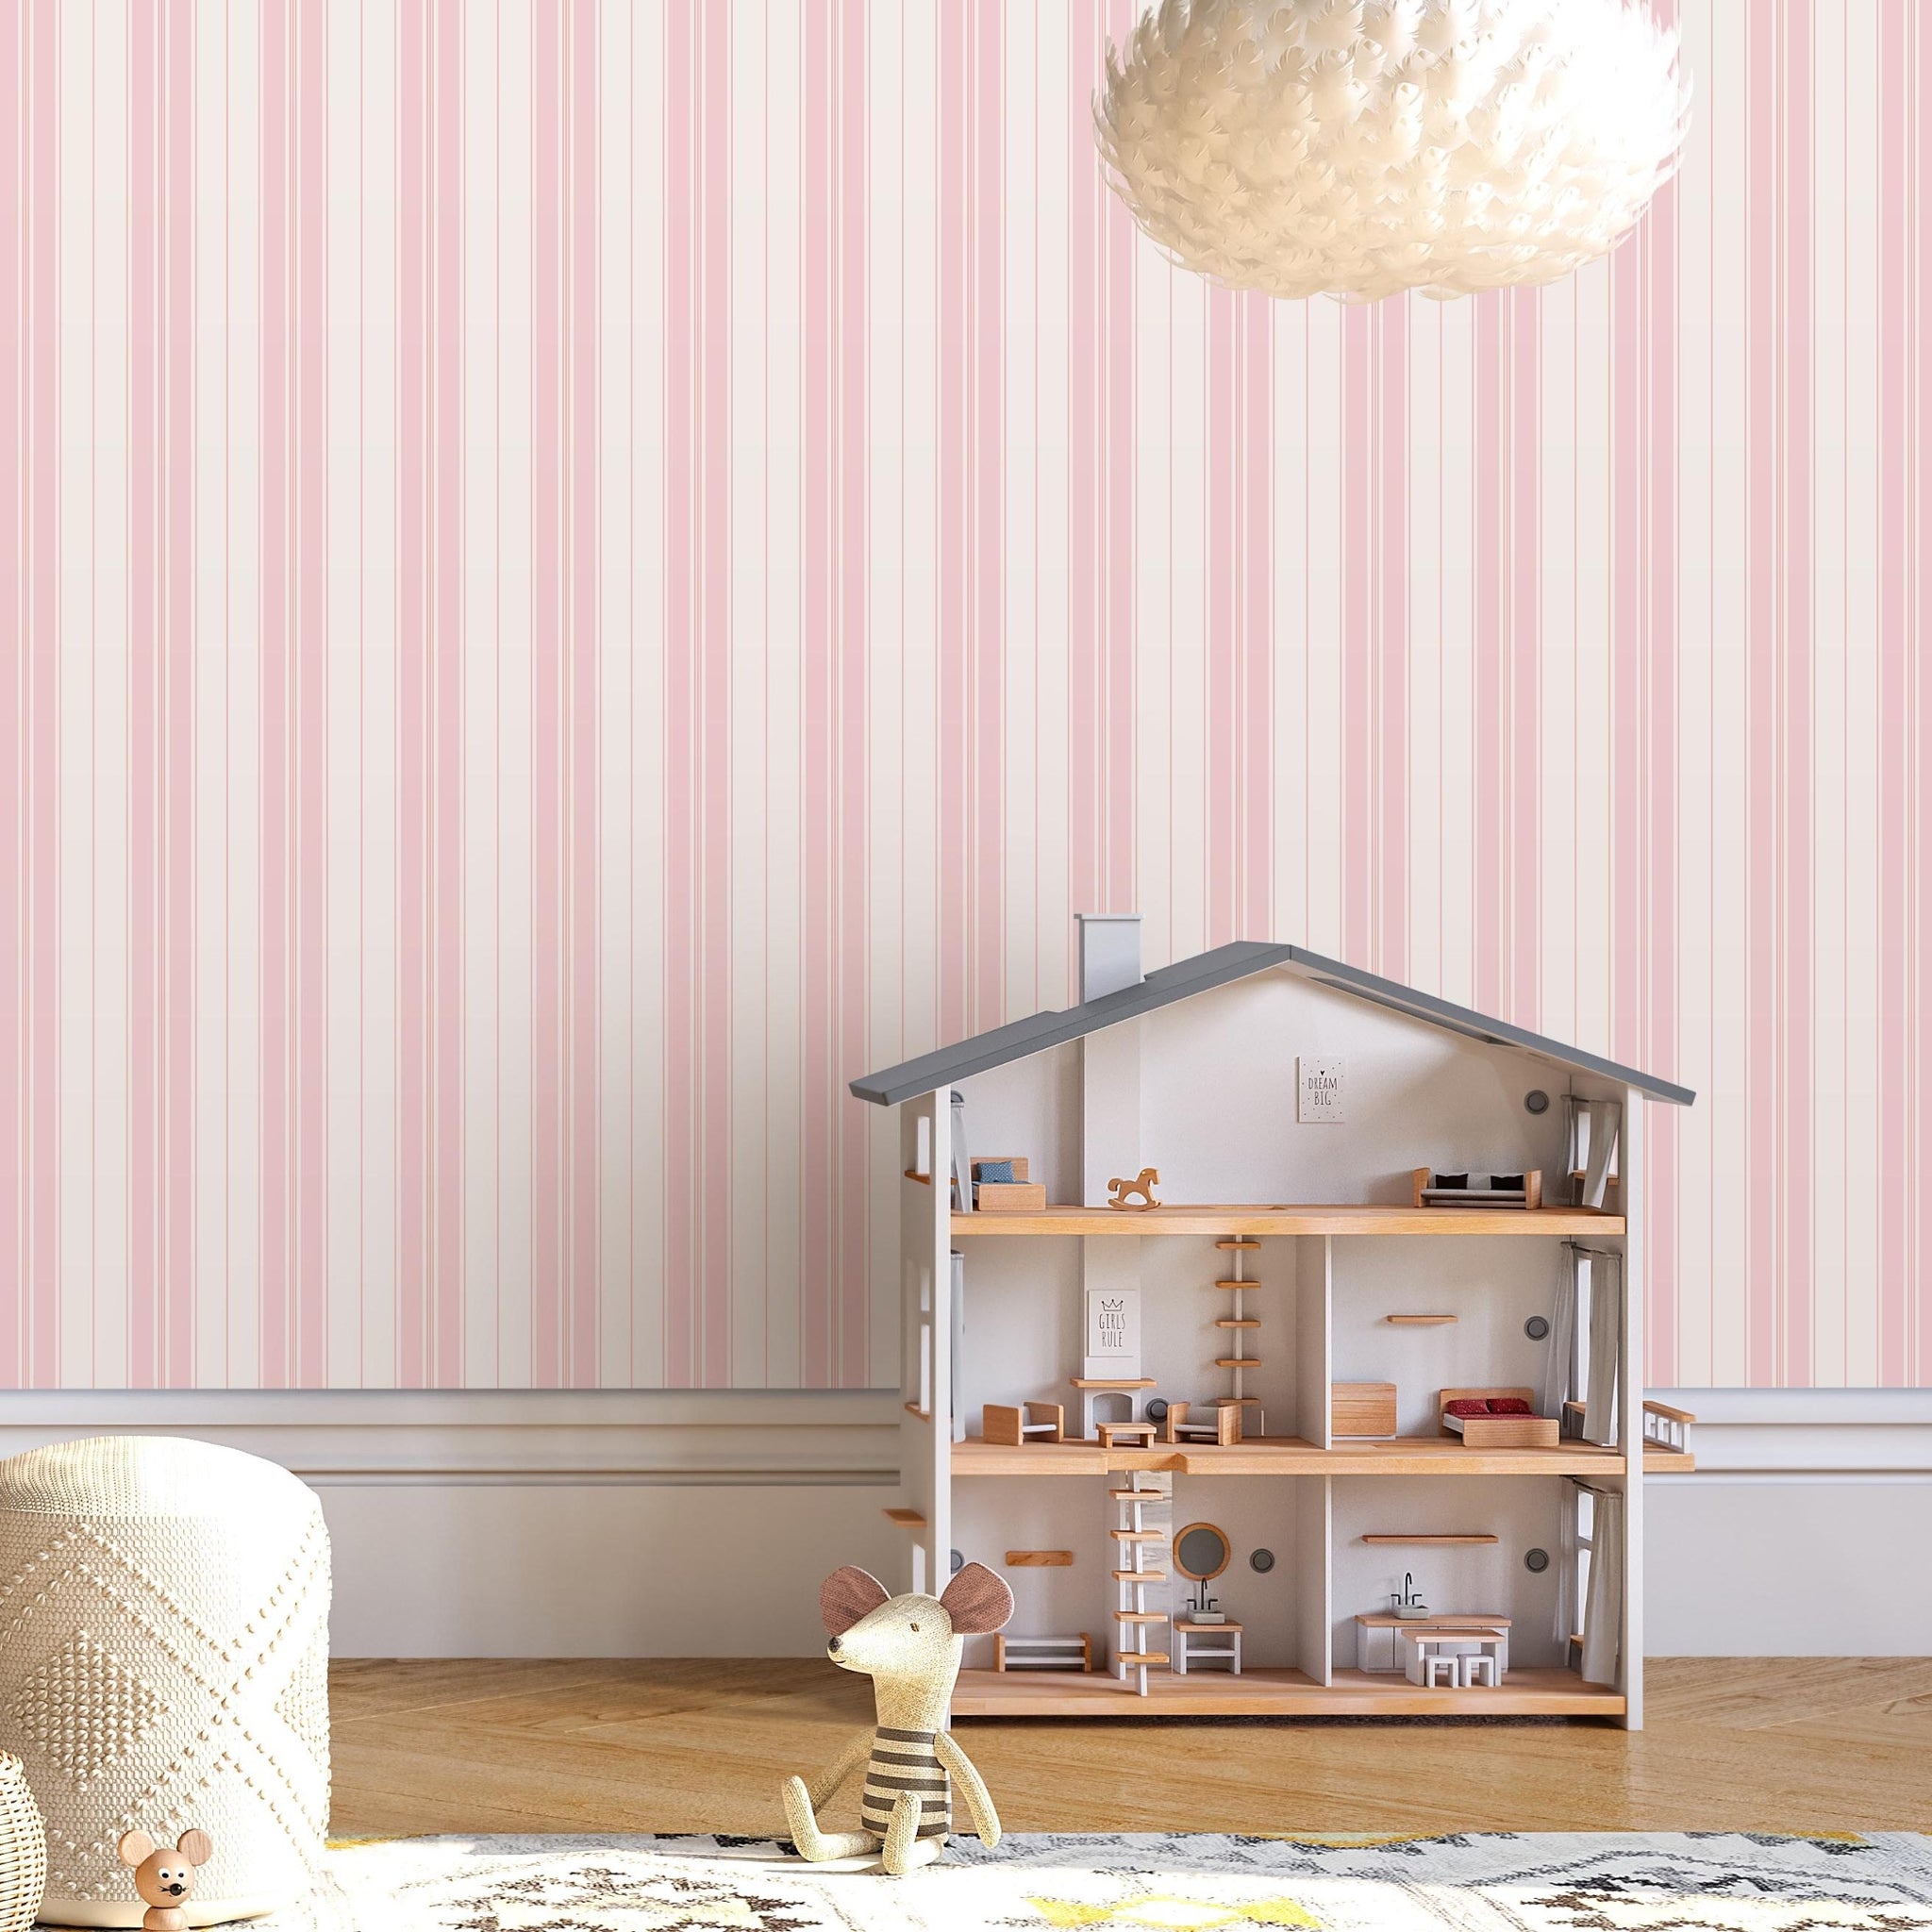 Pink and White Stripe Peel and Stick Wallpaper - Cotton Candy Stripes